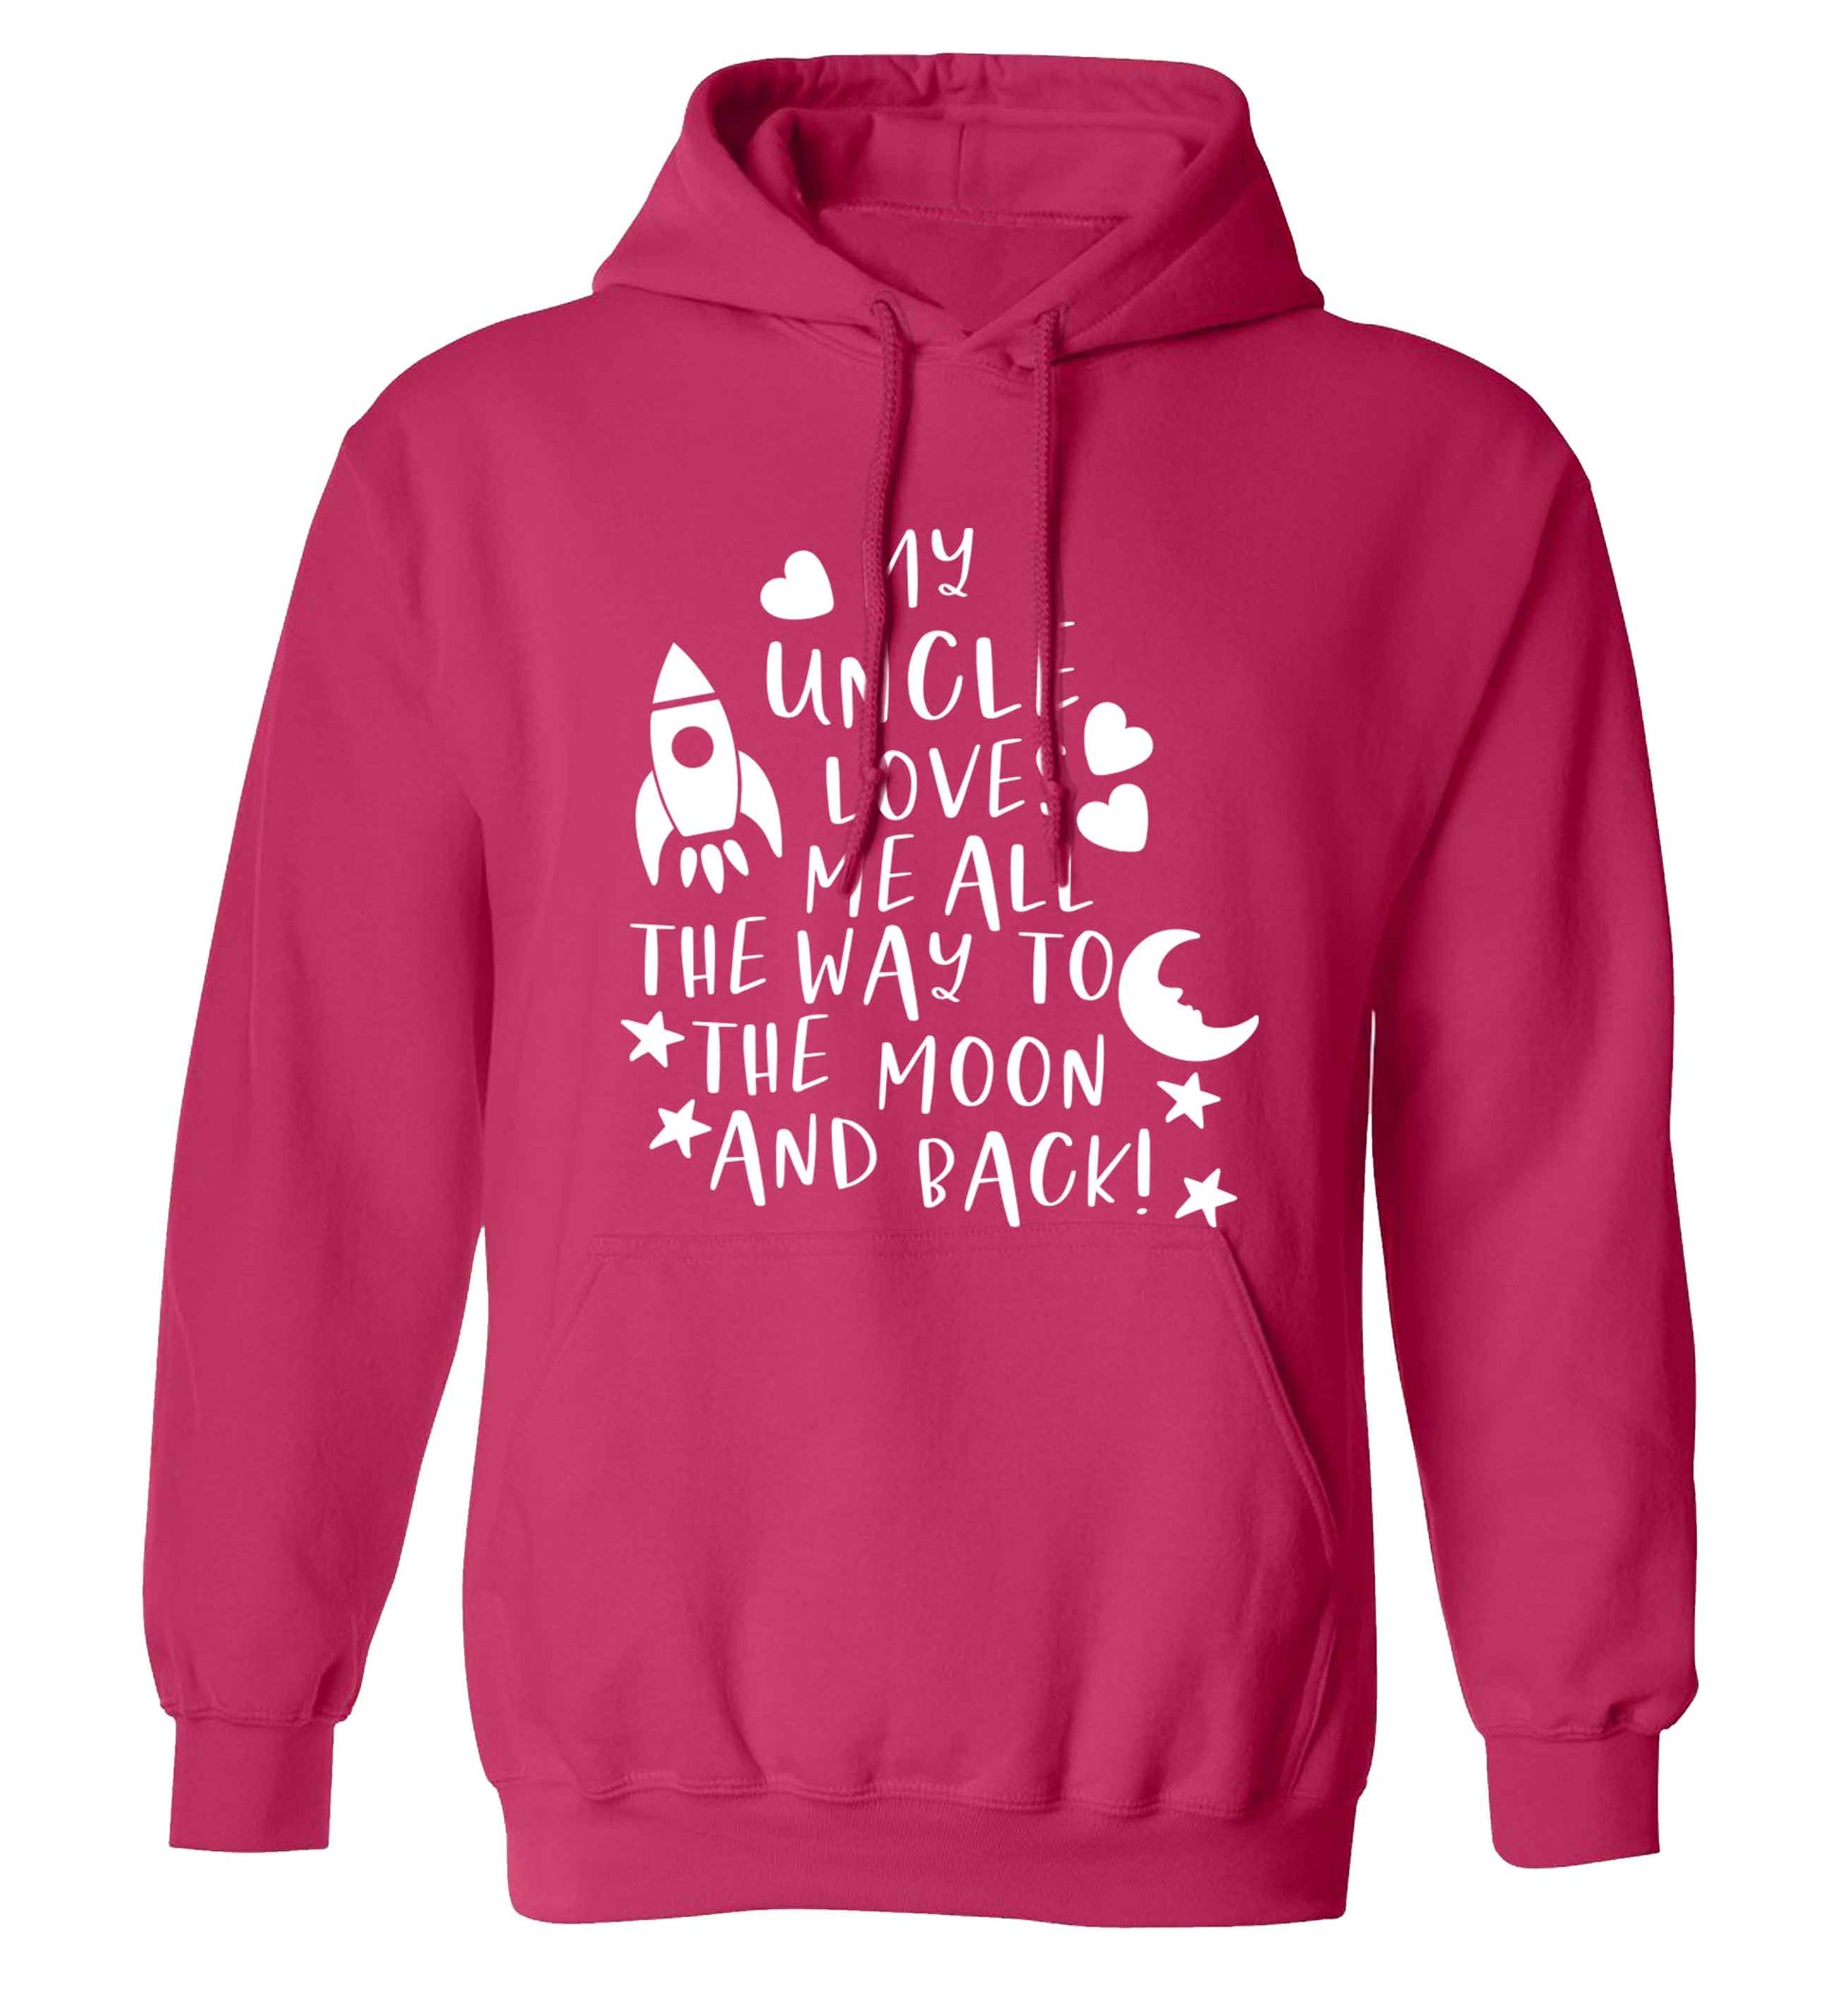 My uncle loves me all the way to the moon and back adults unisex pink hoodie 2XL